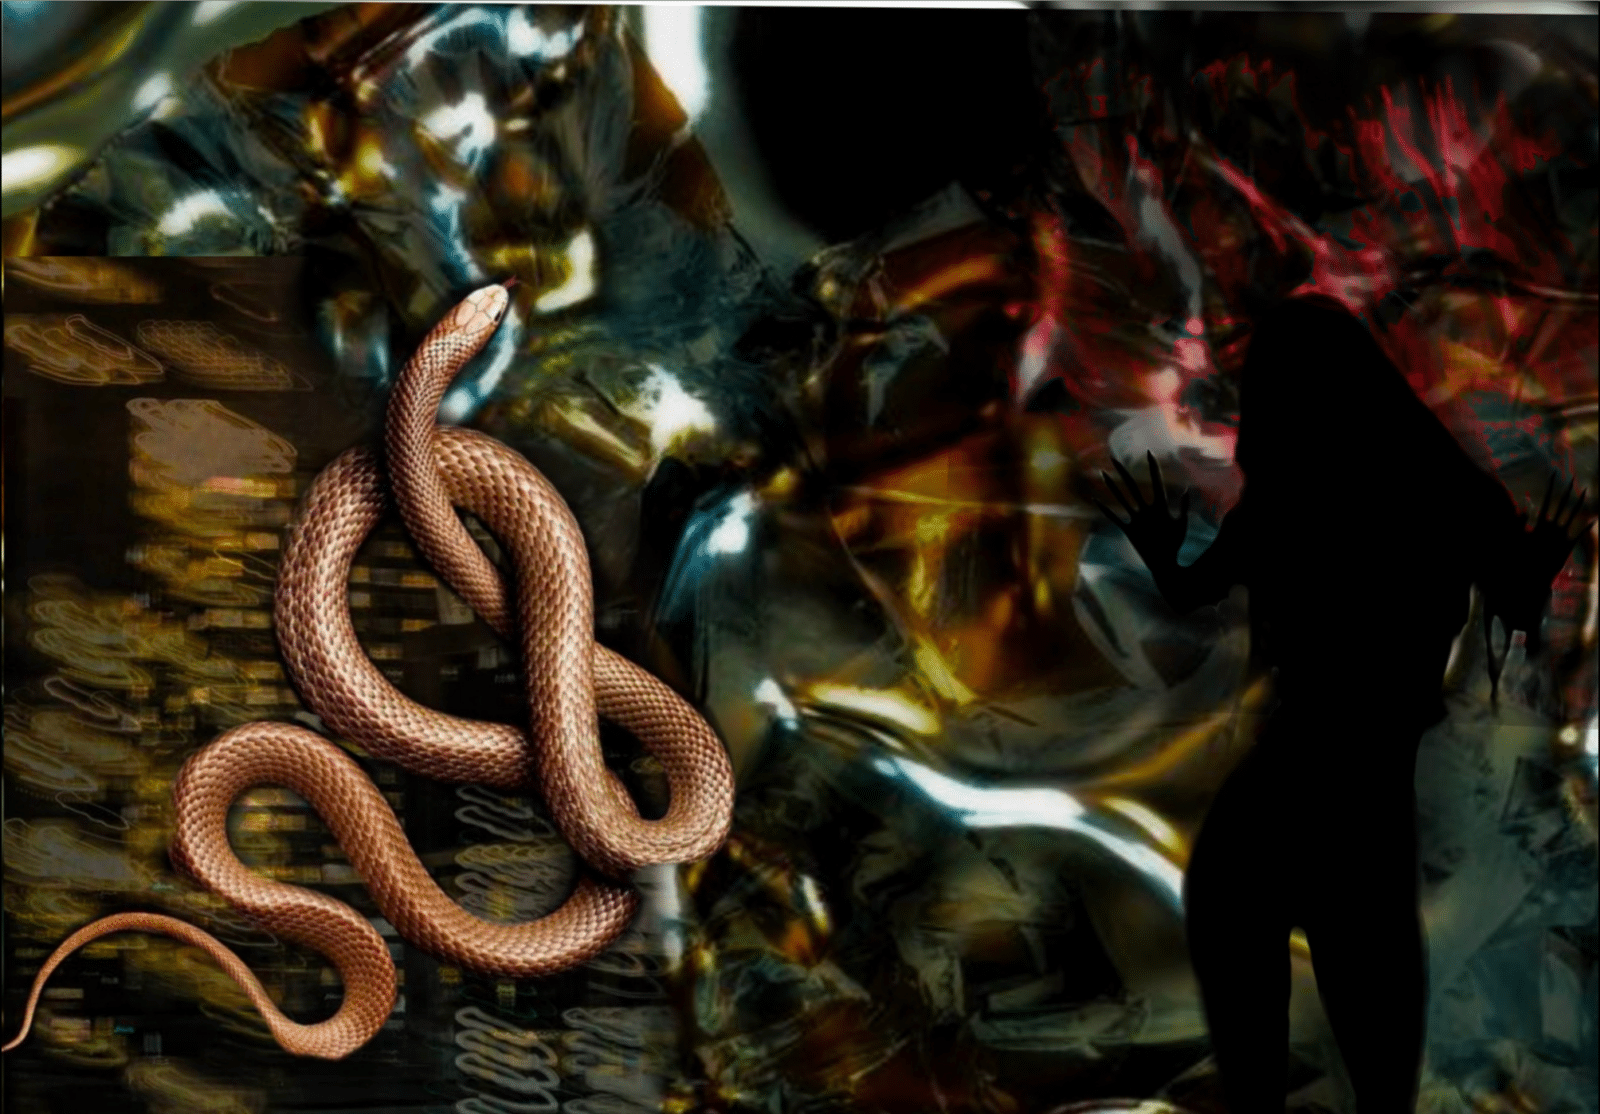 serpent mood board
greens, browns, red and earthy tones with snake textures 
